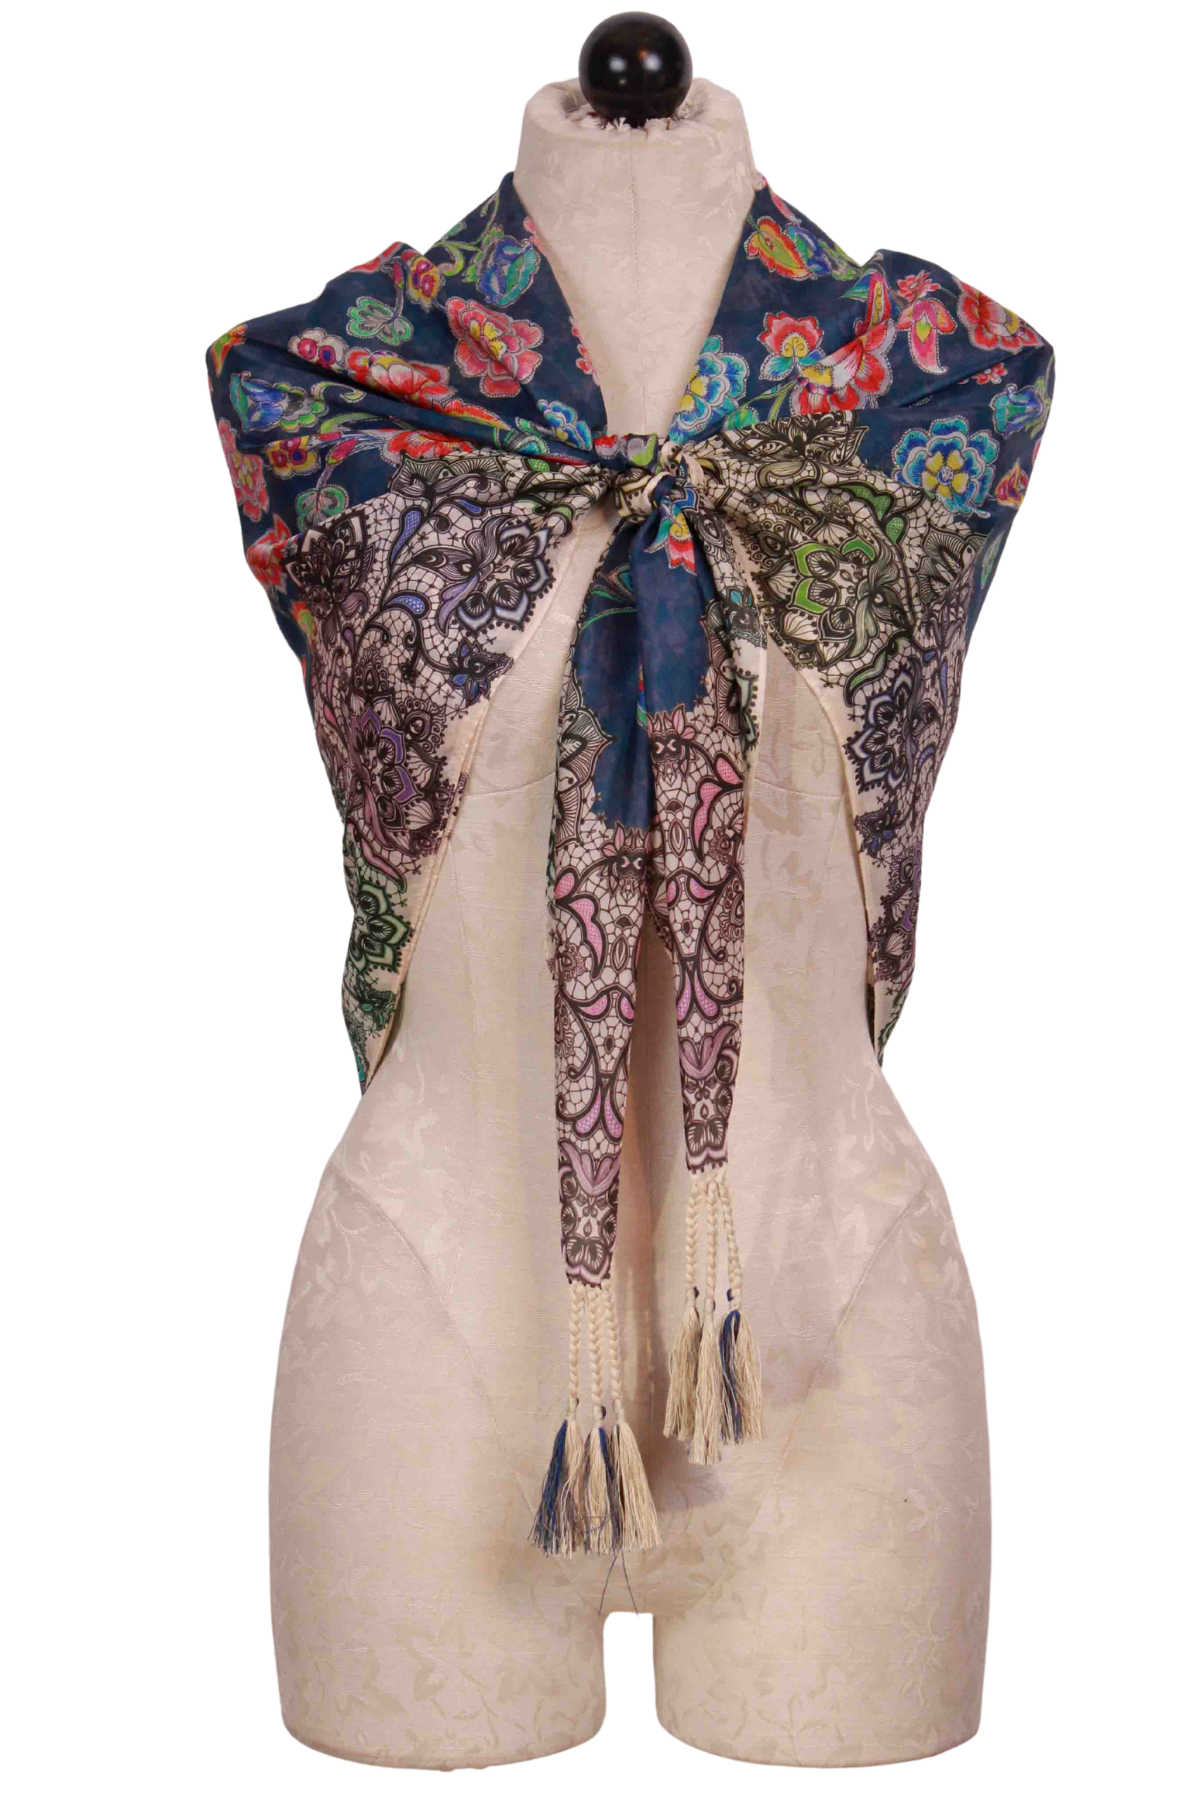 Peppermint Silk Scarf by Johnny Was tied around mannequin